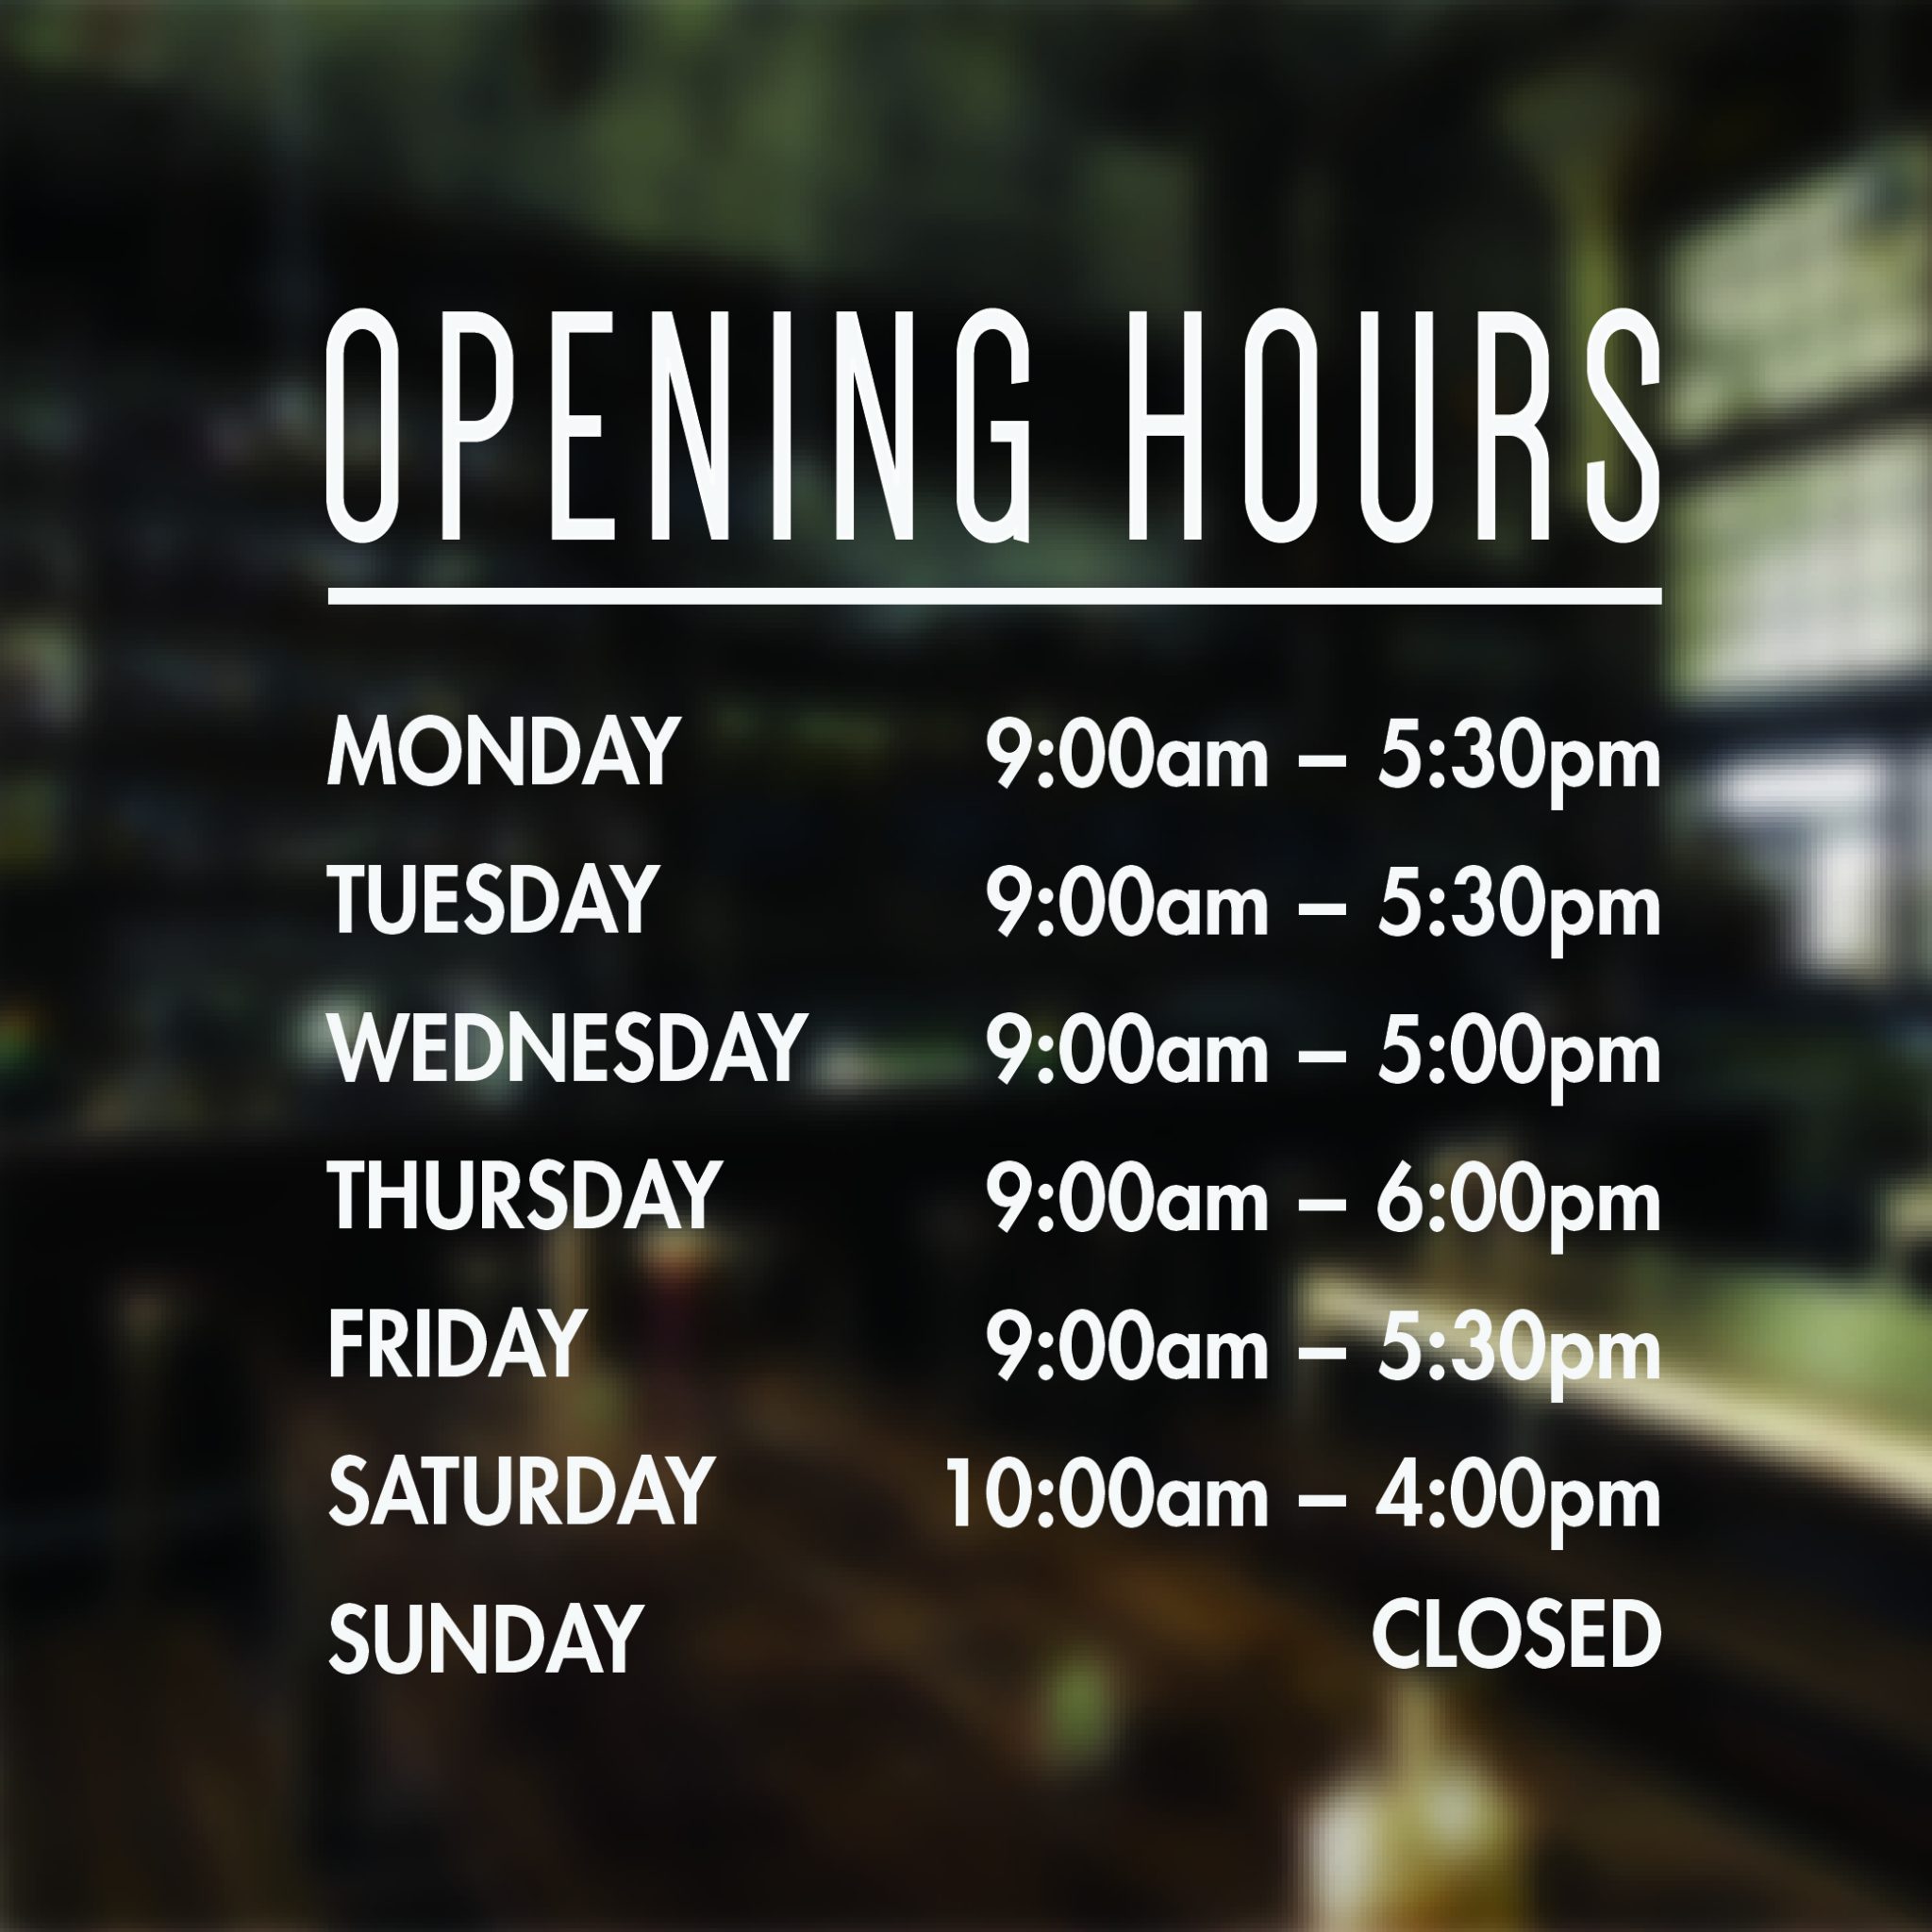 OPENING HOURS TIME SHOP DECAL STICKER WINDOW WALL SIGN CUSTOM OPTIONS 